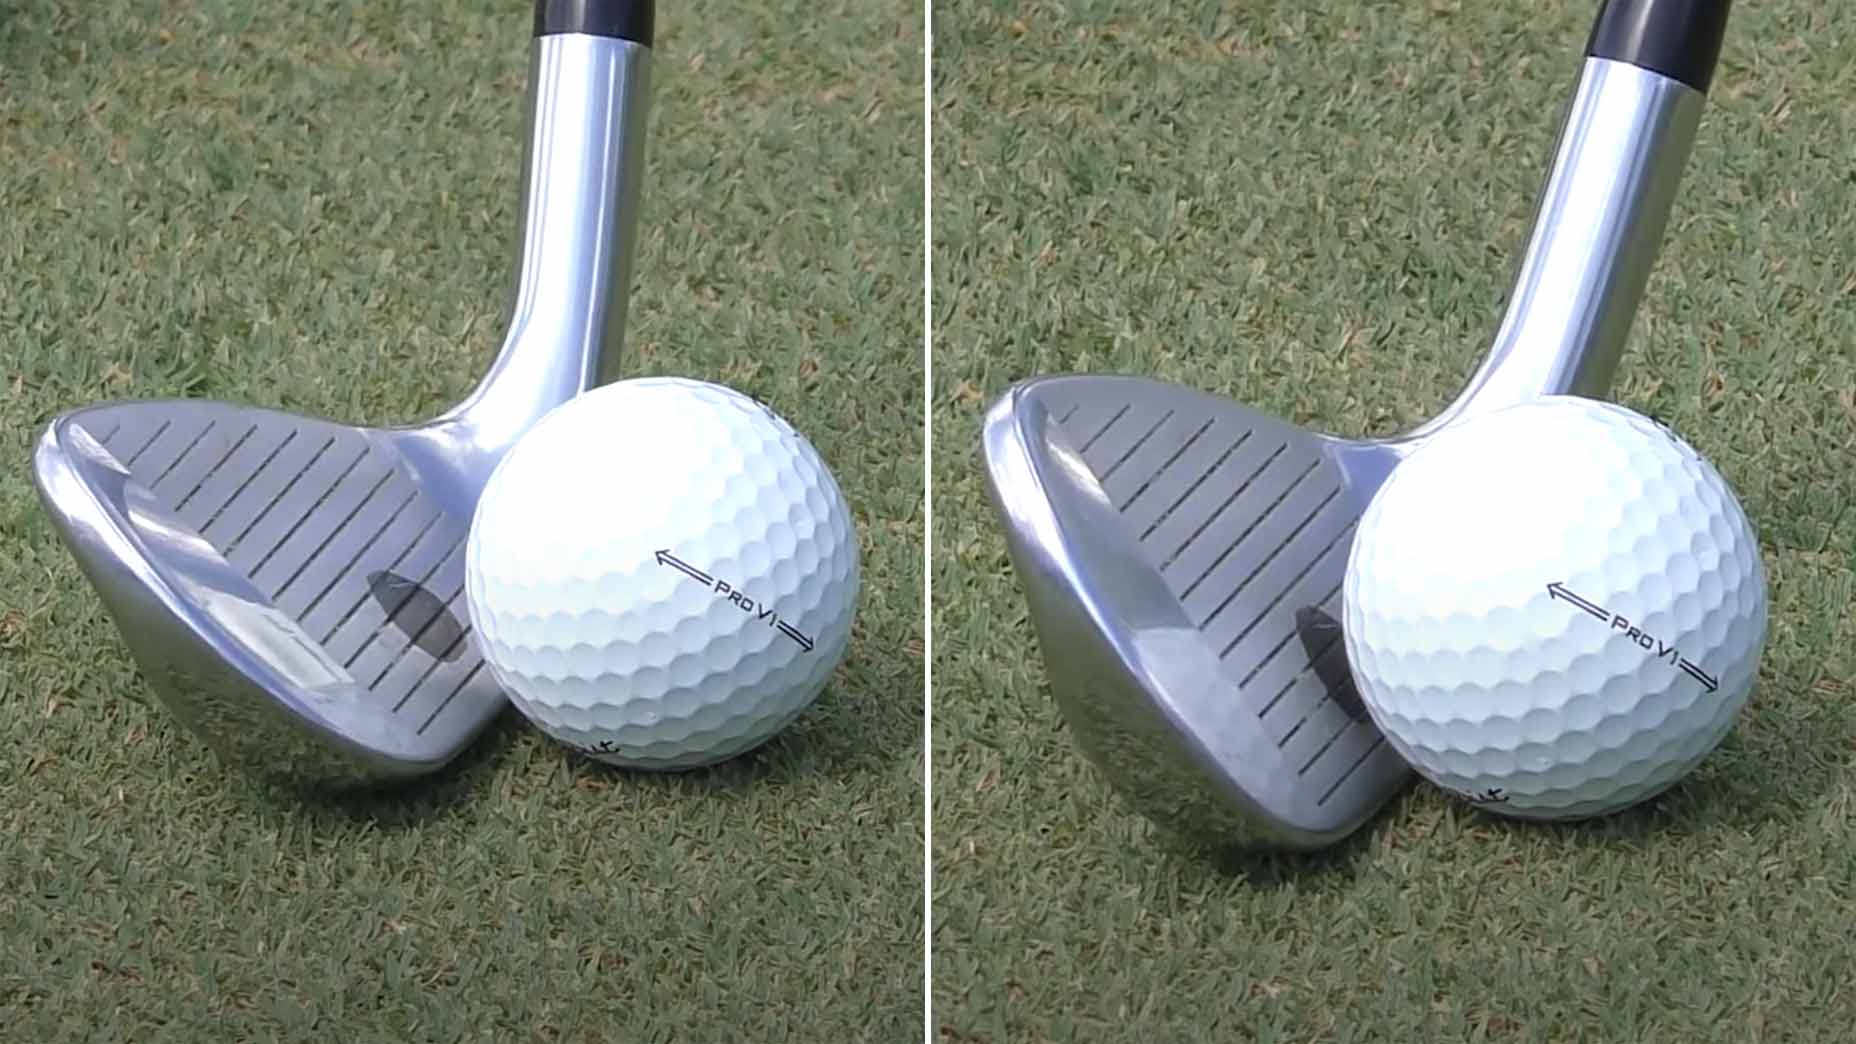 Fascinating video shows why shaft lean is so important for ball striking